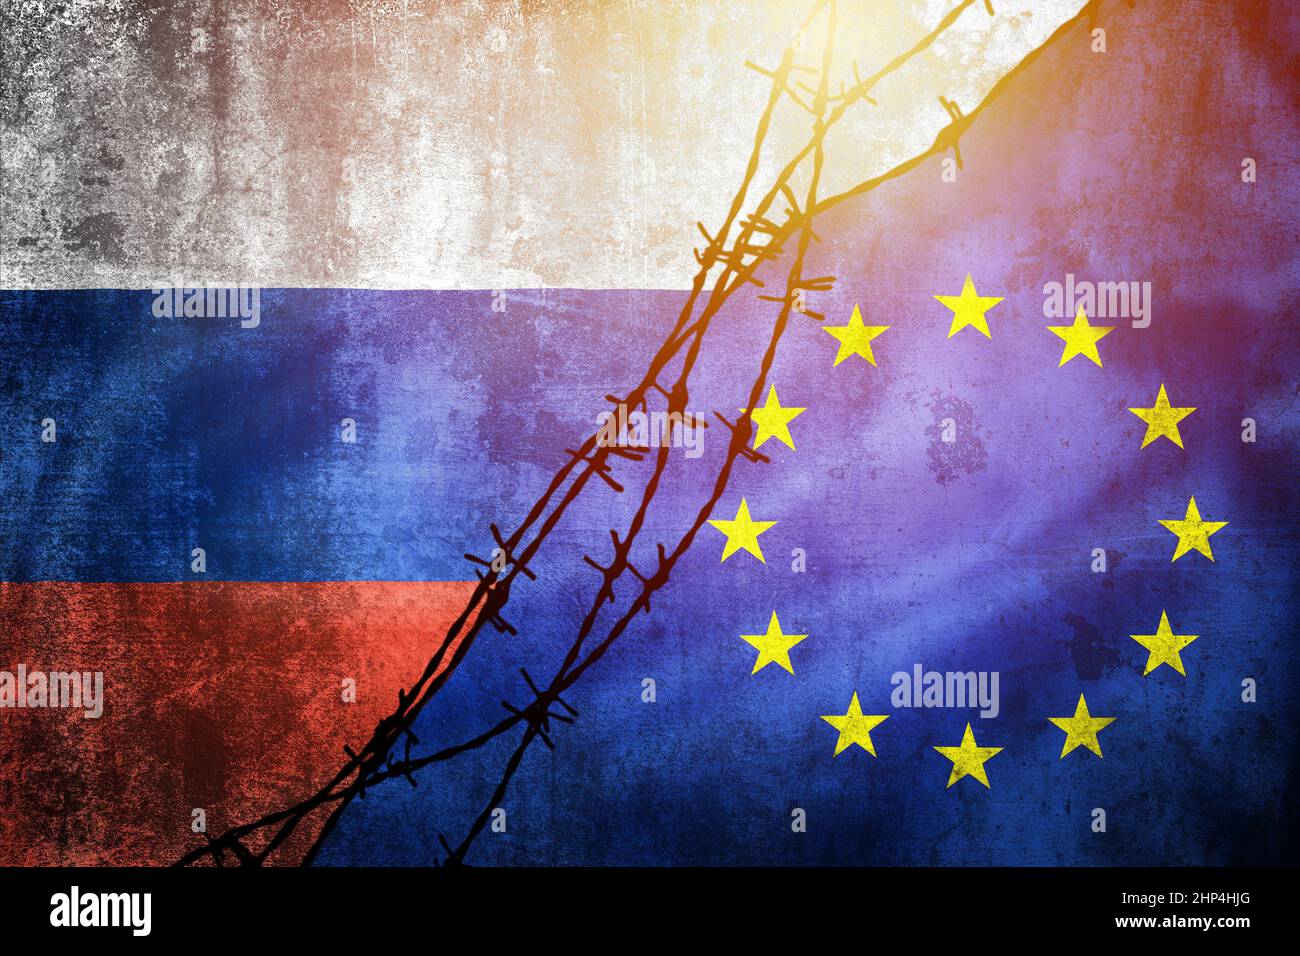 Grunge flags of Russia and European Union divided by barb wire sun haze illustration, concept of tense relations in Ukraine crisis Stock Photo